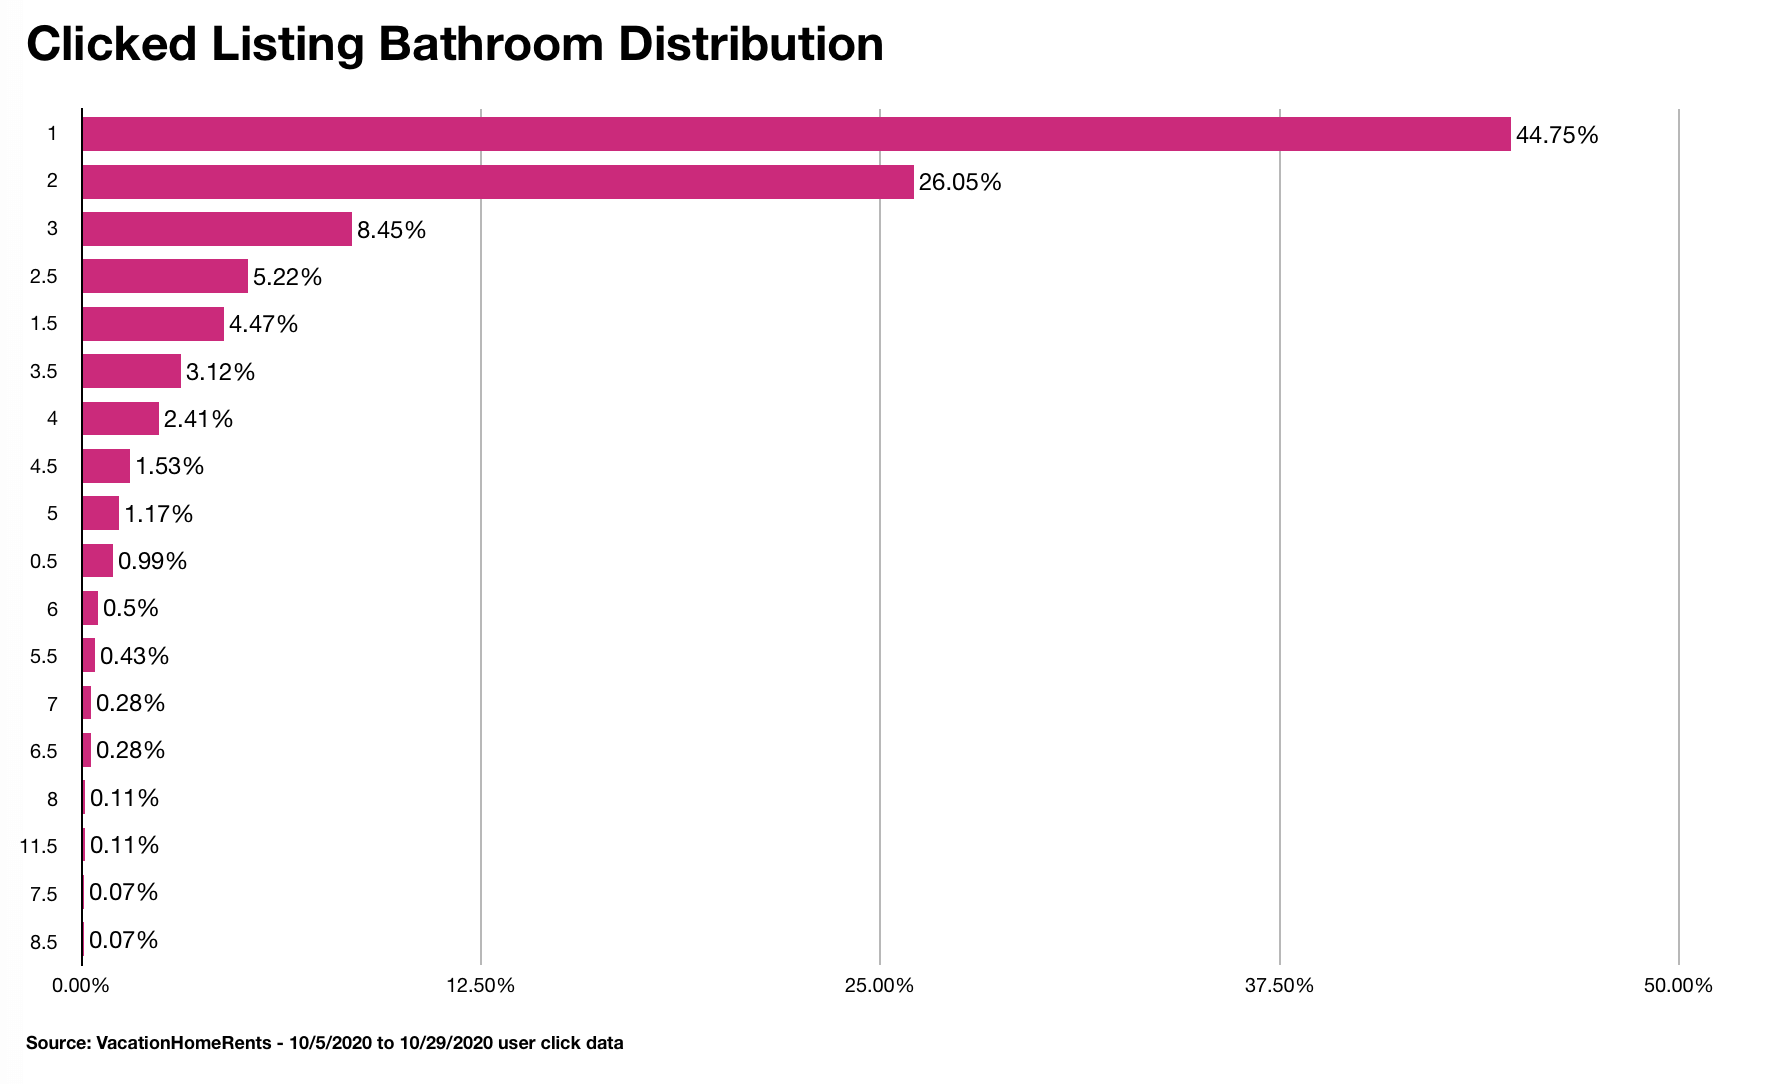 2020 Travel Trends Clicked Number of Bathroom Distribution by VacationHomeRents.com